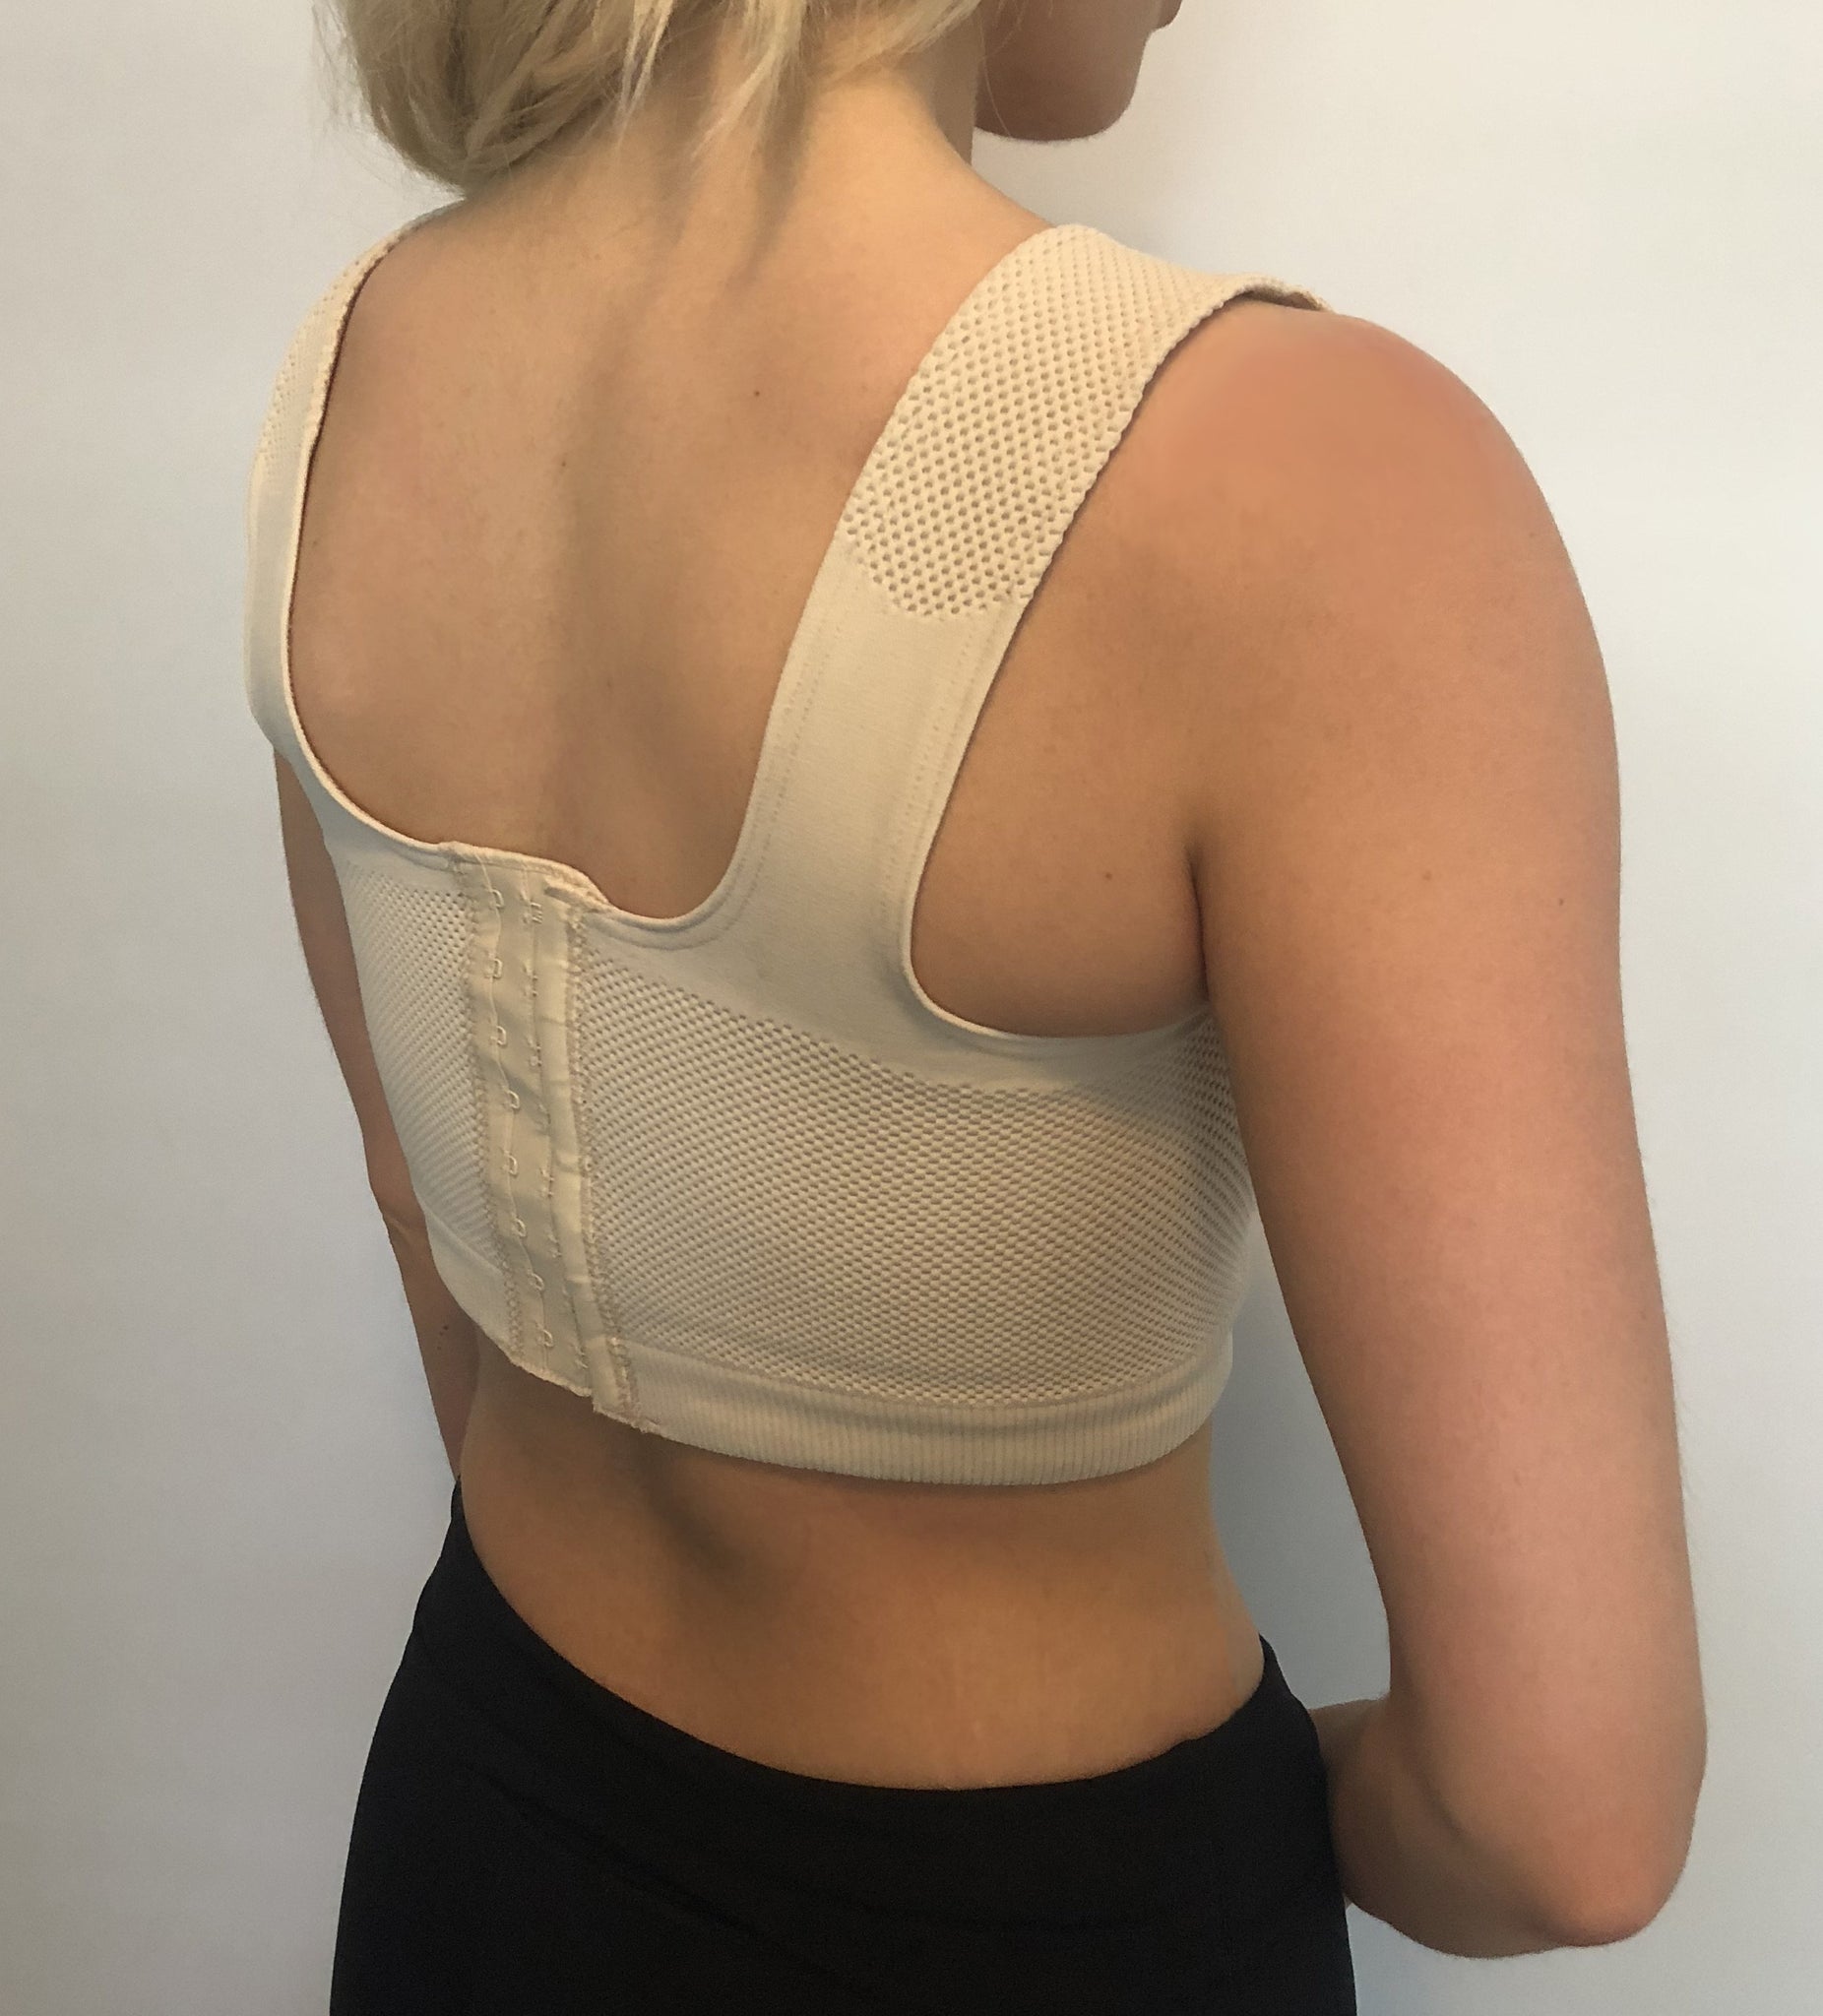 Caromed Post Surgical Bras and Arm Compression Garments